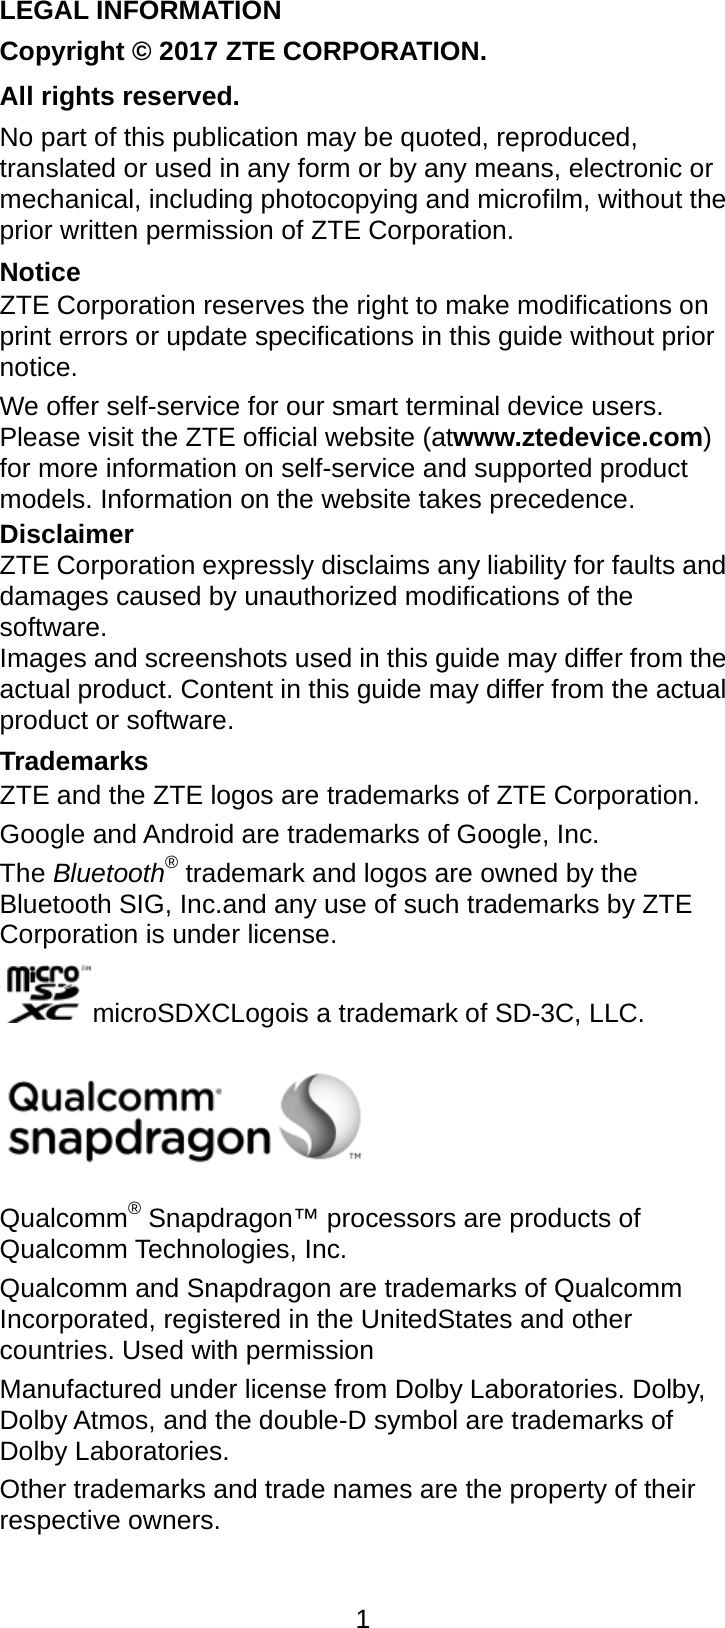  1 LEGAL INFORMATION Copyright © 2017 ZTE CORPORATION. All rights reserved. No part of this publication may be quoted, reproduced, translated or used in any form or by any means, electronic or mechanical, including photocopying and microfilm, without the prior written permission of ZTE Corporation. Notice ZTE Corporation reserves the right to make modifications on print errors or update specifications in this guide without prior notice. We offer self-service for our smart terminal device users. Please visit the ZTE official website (atwww.ztedevice.com) for more information on self-service and supported product models. Information on the website takes precedence. Disclaimer ZTE Corporation expressly disclaims any liability for faults and damages caused by unauthorized modifications of the software. Images and screenshots used in this guide may differ from the actual product. Content in this guide may differ from the actual product or software. Trademarks ZTE and the ZTE logos are trademarks of ZTE Corporation. Google and Android are trademarks of Google, Inc.   The Bluetooth® trademark and logos are owned by the Bluetooth SIG, Inc.and any use of such trademarks by ZTE Corporation is under license. microSDXCLogois a trademark of SD-3C, LLC.  Qualcomm® Snapdragon™ processors are products of Qualcomm Technologies, Inc.   Qualcomm and Snapdragon are trademarks of Qualcomm Incorporated, registered in the UnitedStates and other countries. Used with permission Manufactured under license from Dolby Laboratories. Dolby, Dolby Atmos, and the double-D symbol are trademarks of Dolby Laboratories. Other trademarks and trade names are the property of their respective owners. 